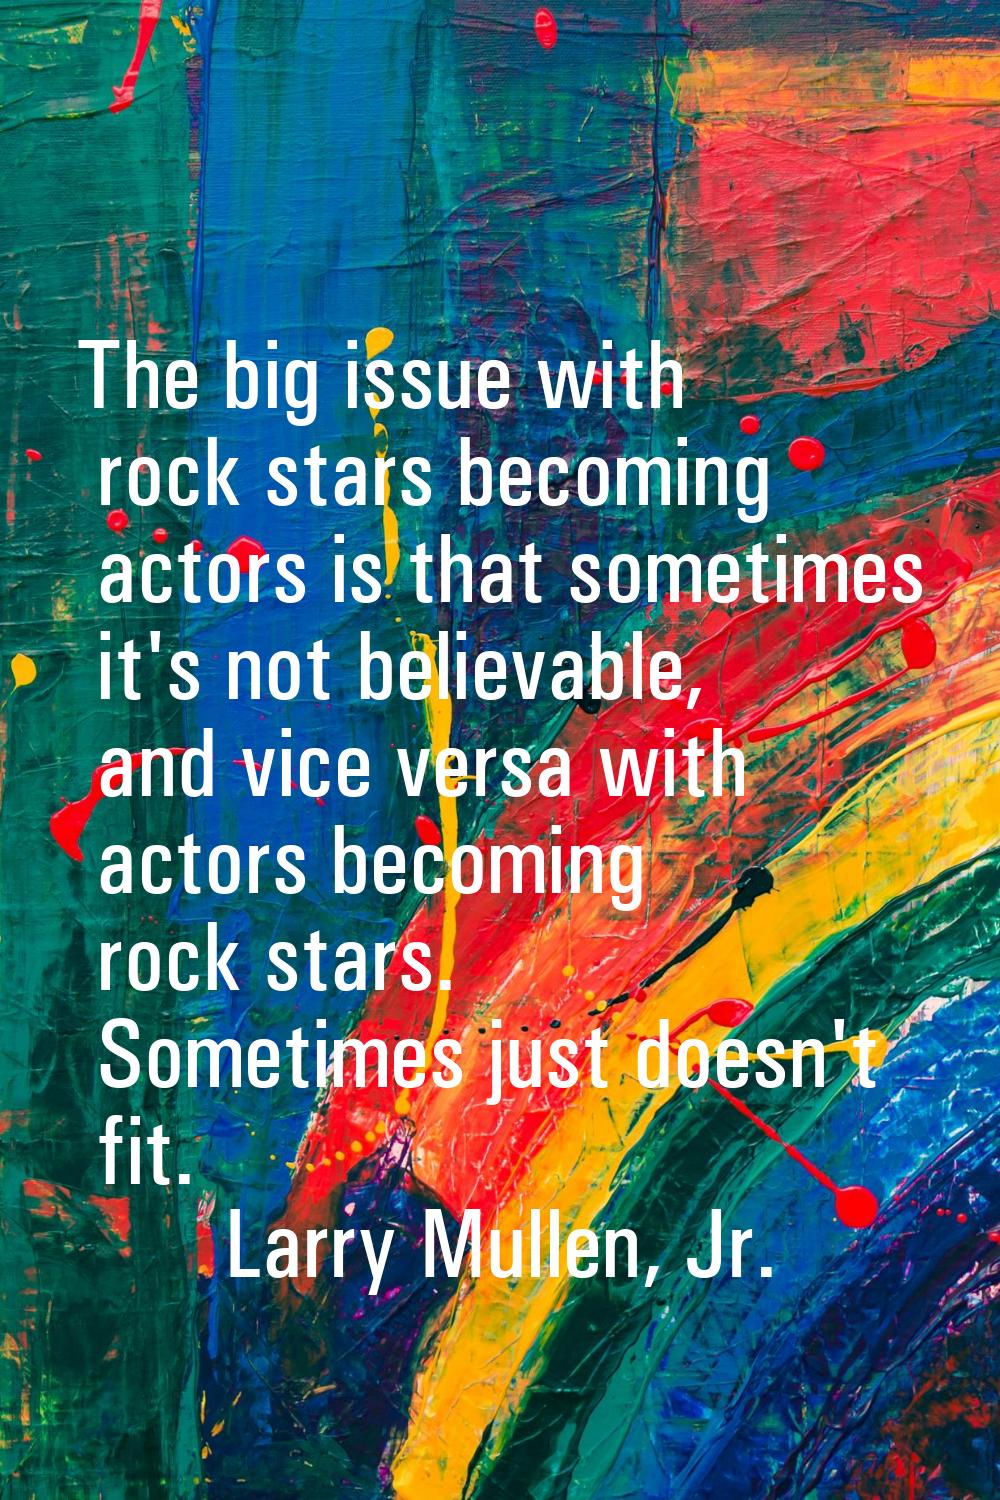 The big issue with rock stars becoming actors is that sometimes it's not believable, and vice versa